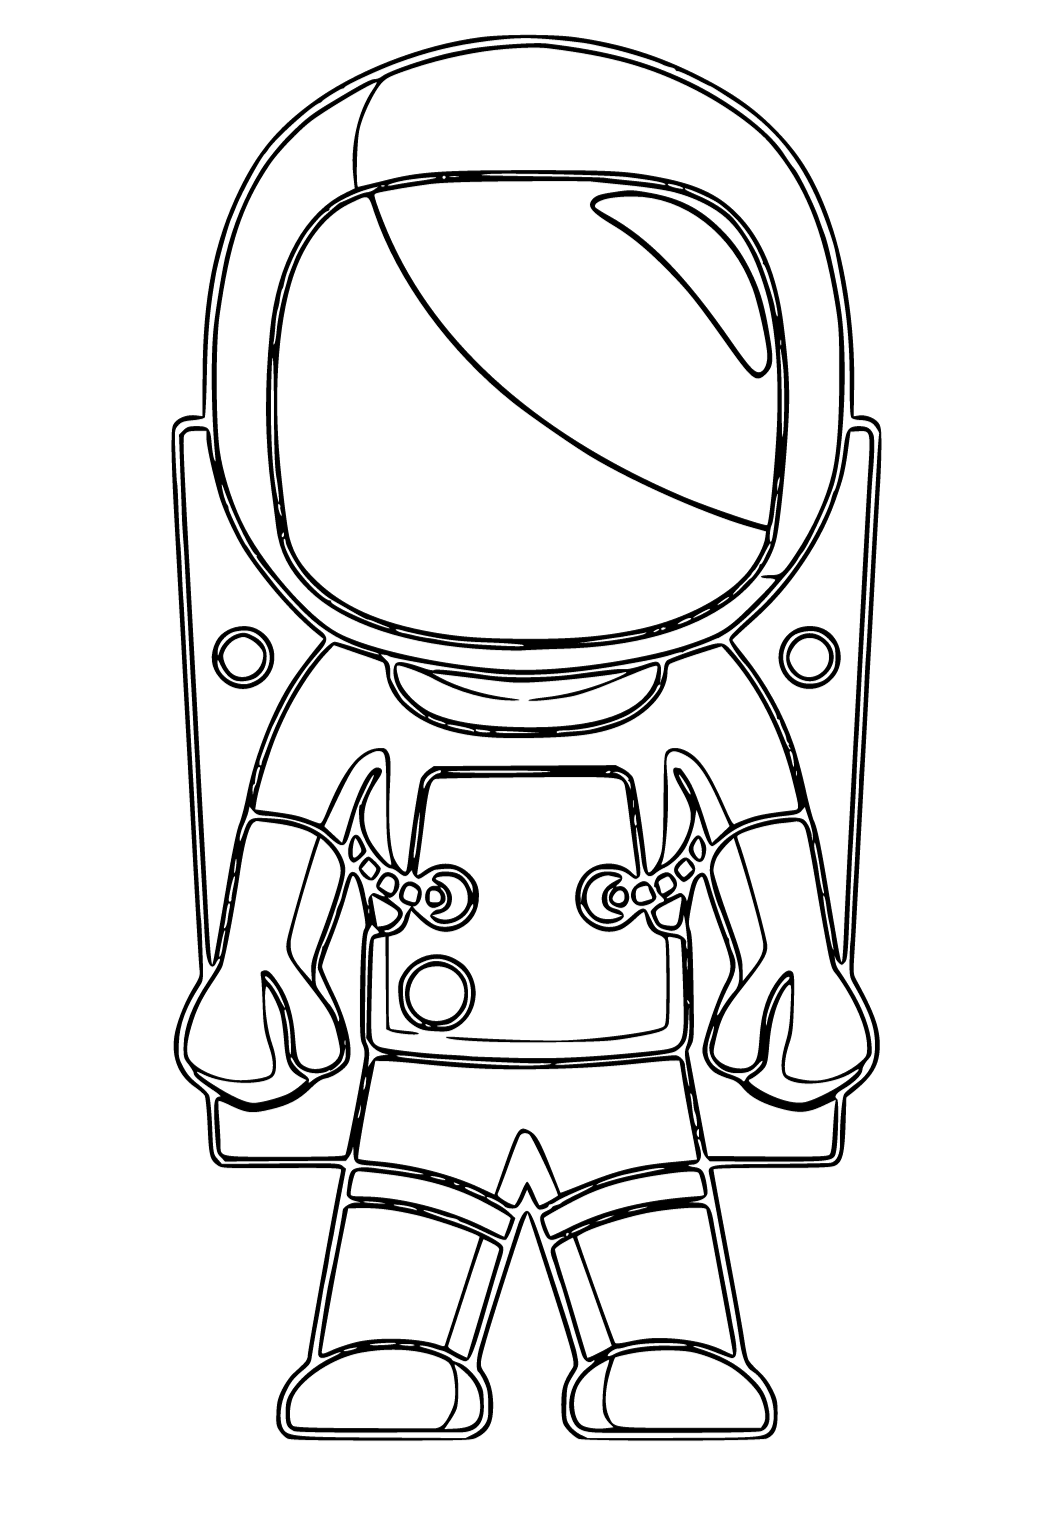 astronaut helmet coloring pages